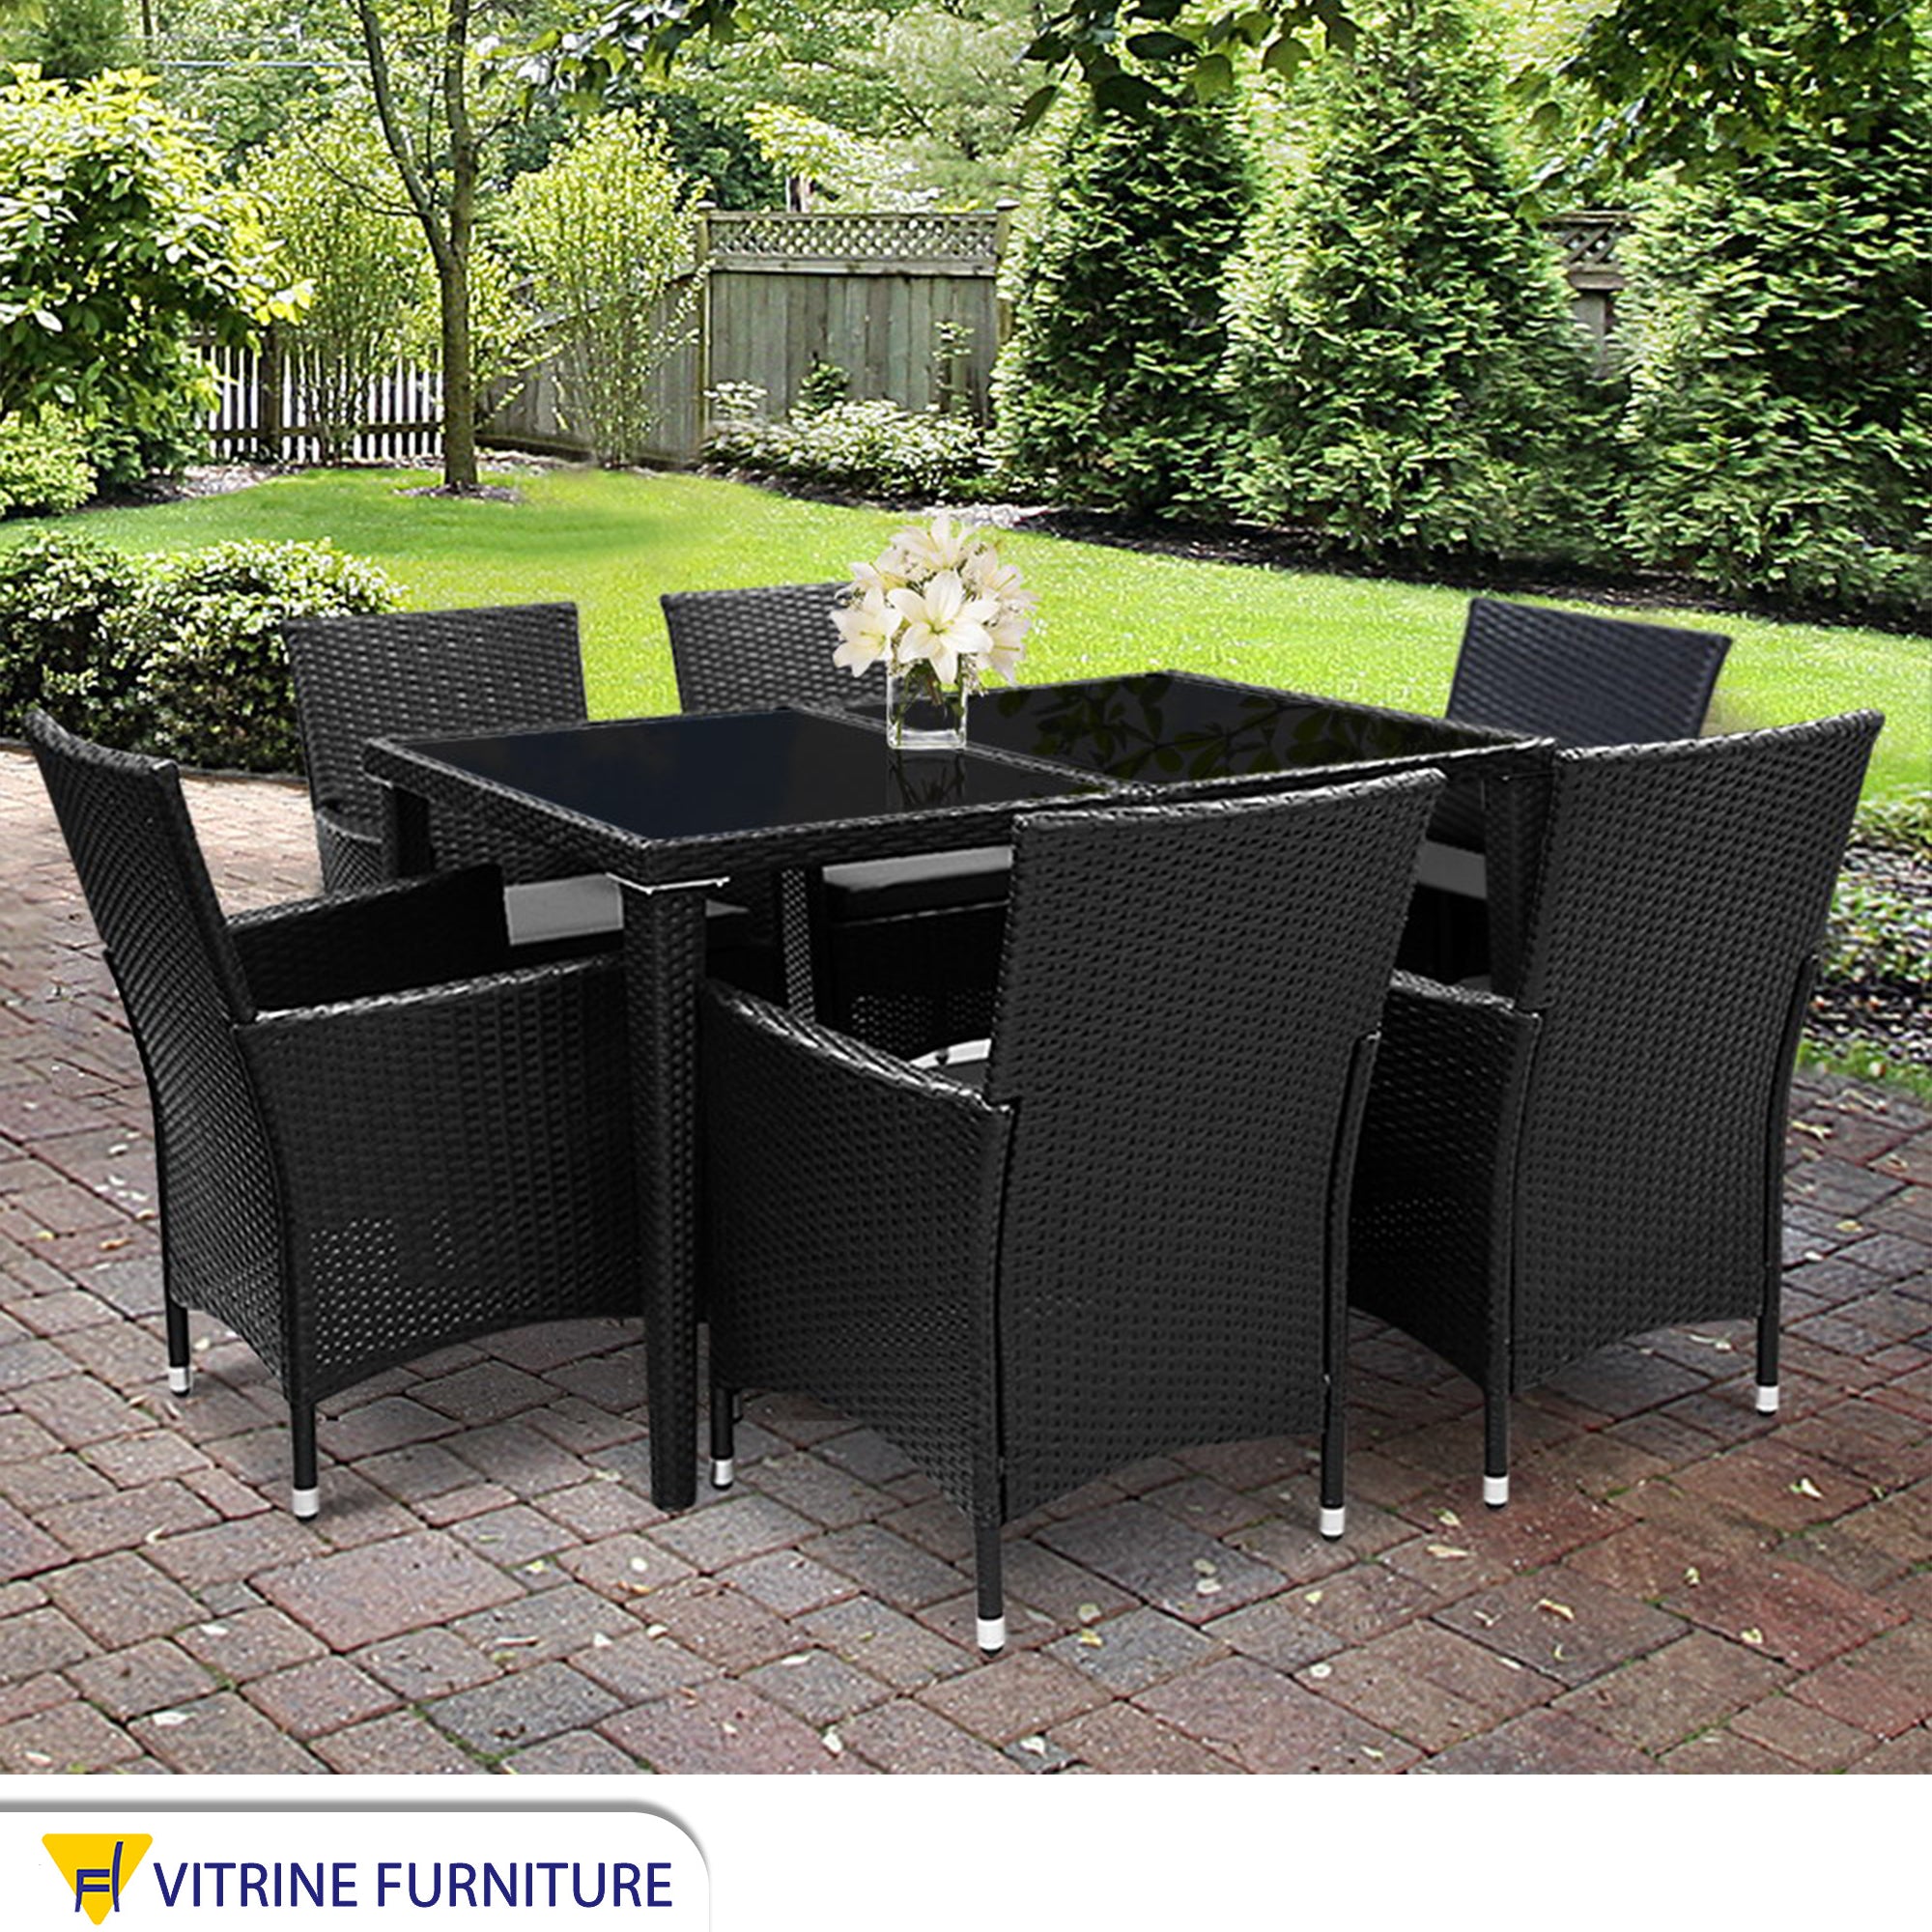 Rattan dining set with table and six chairs